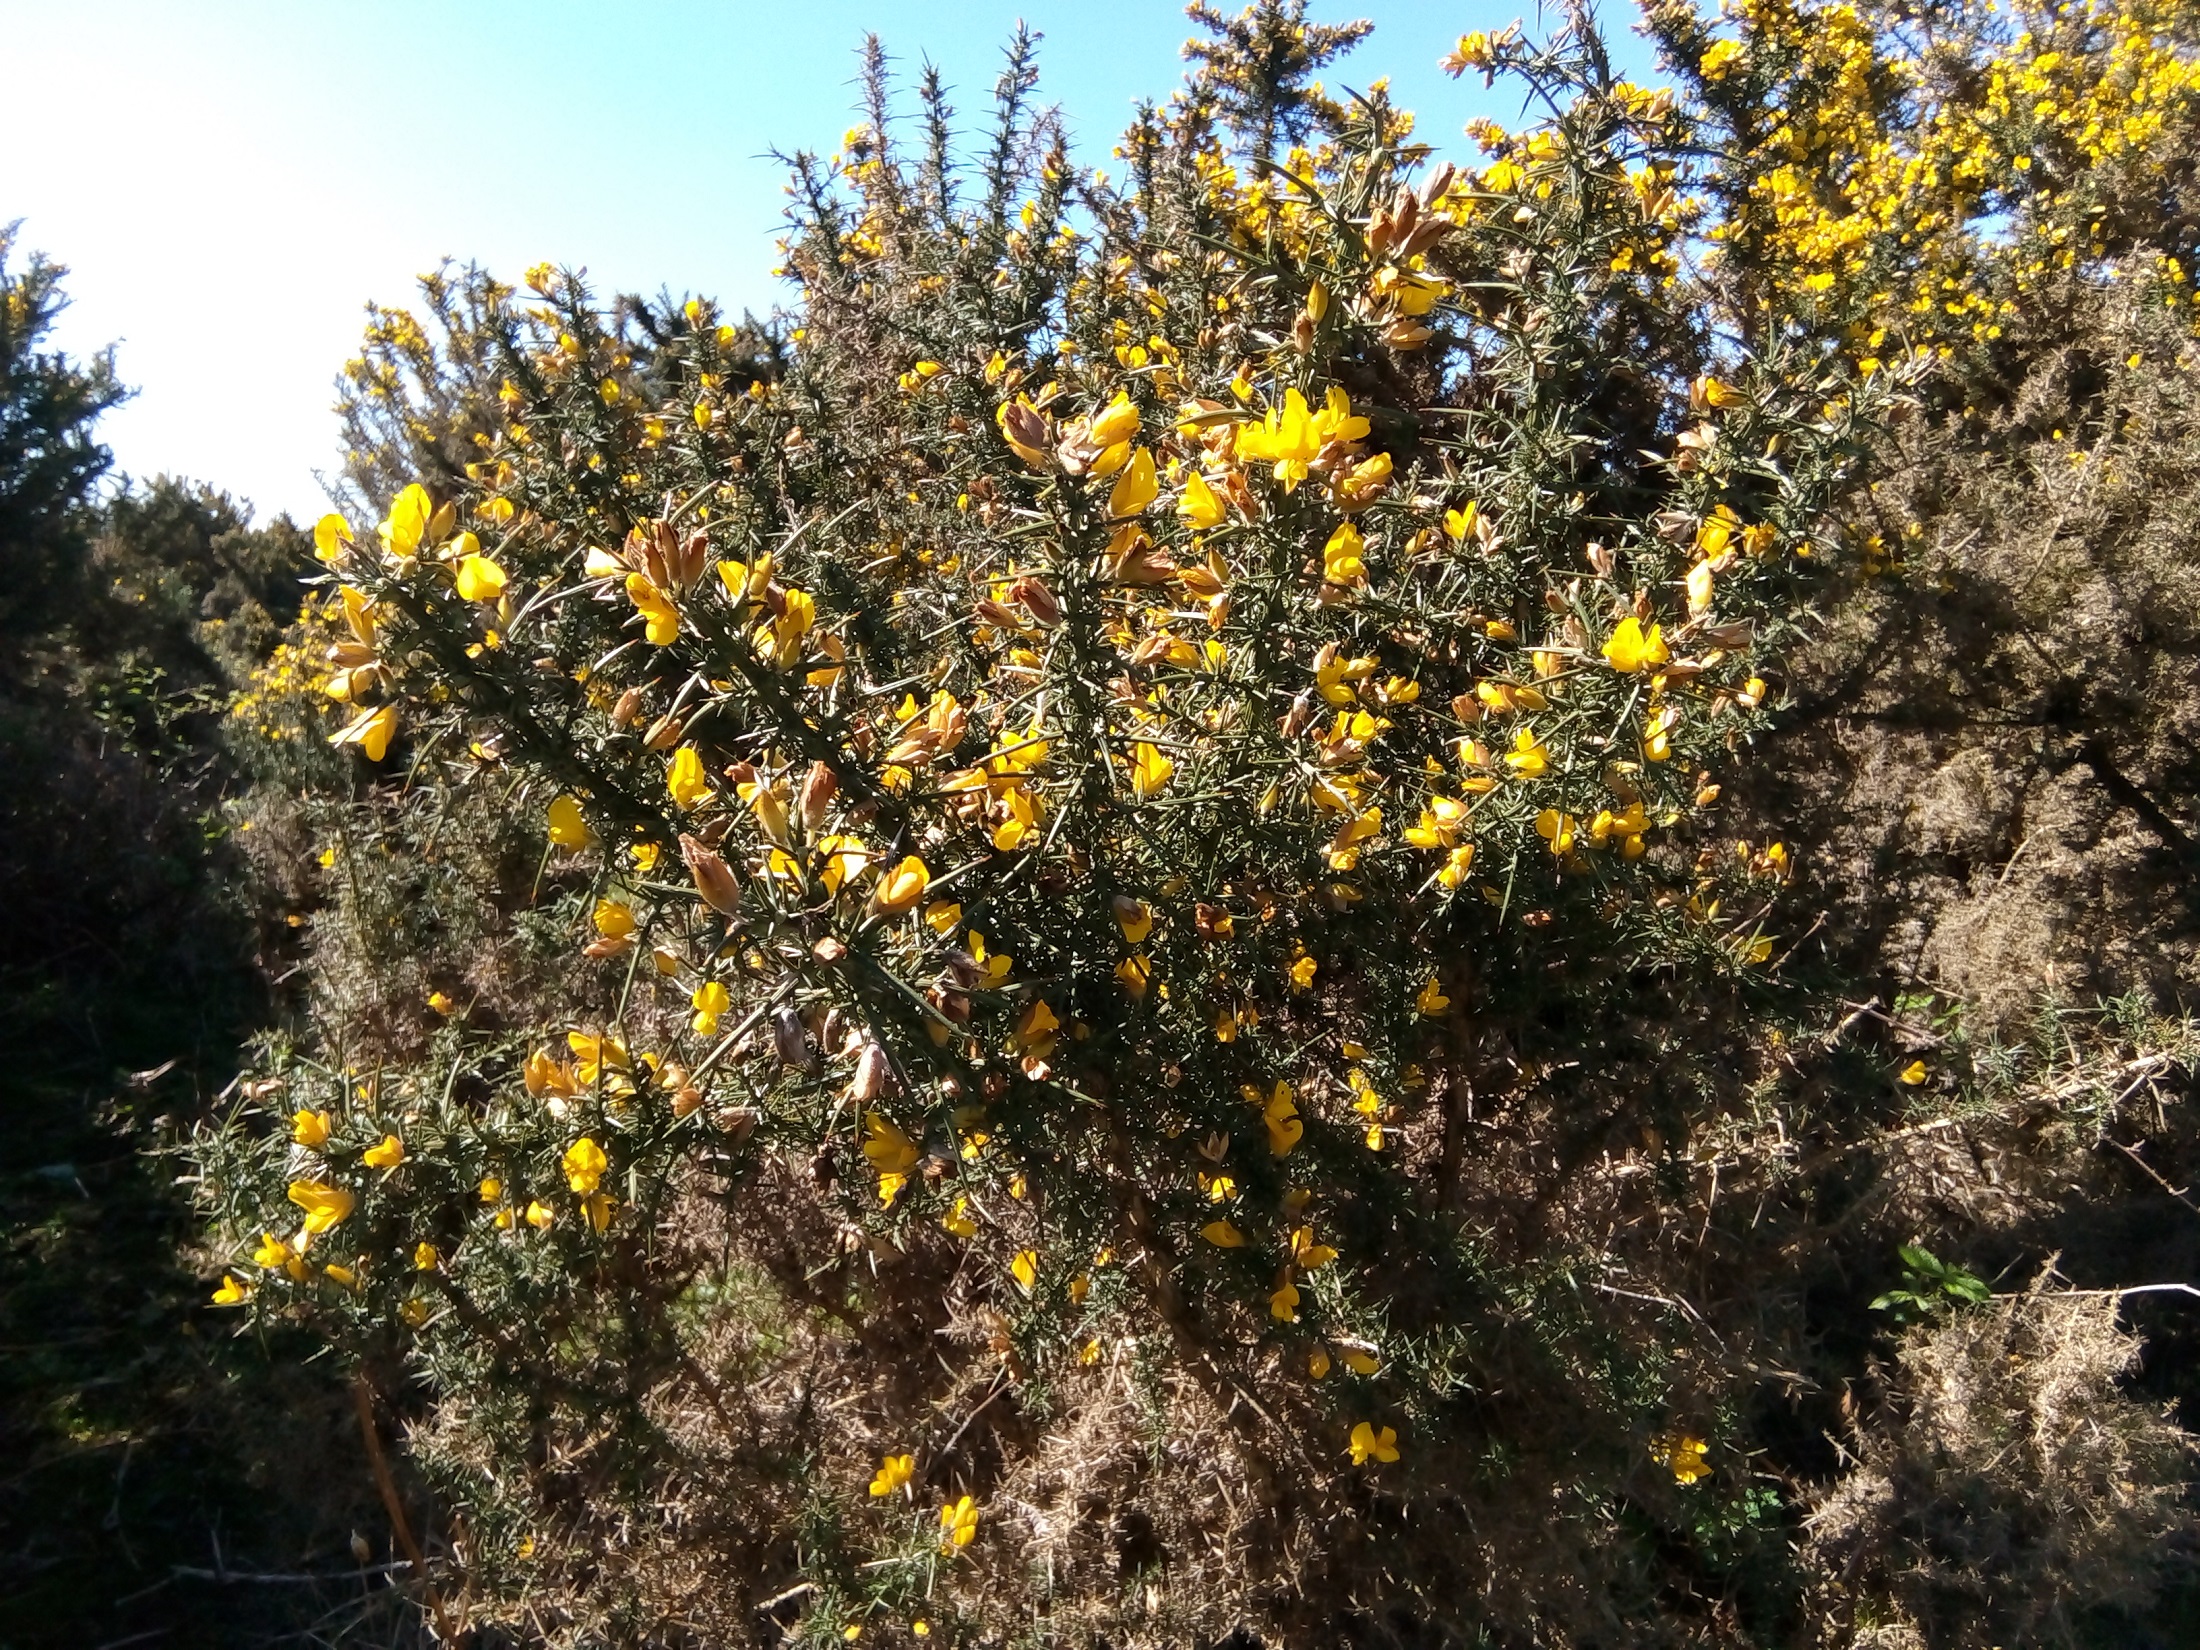 Gorse in flower on a sunny day